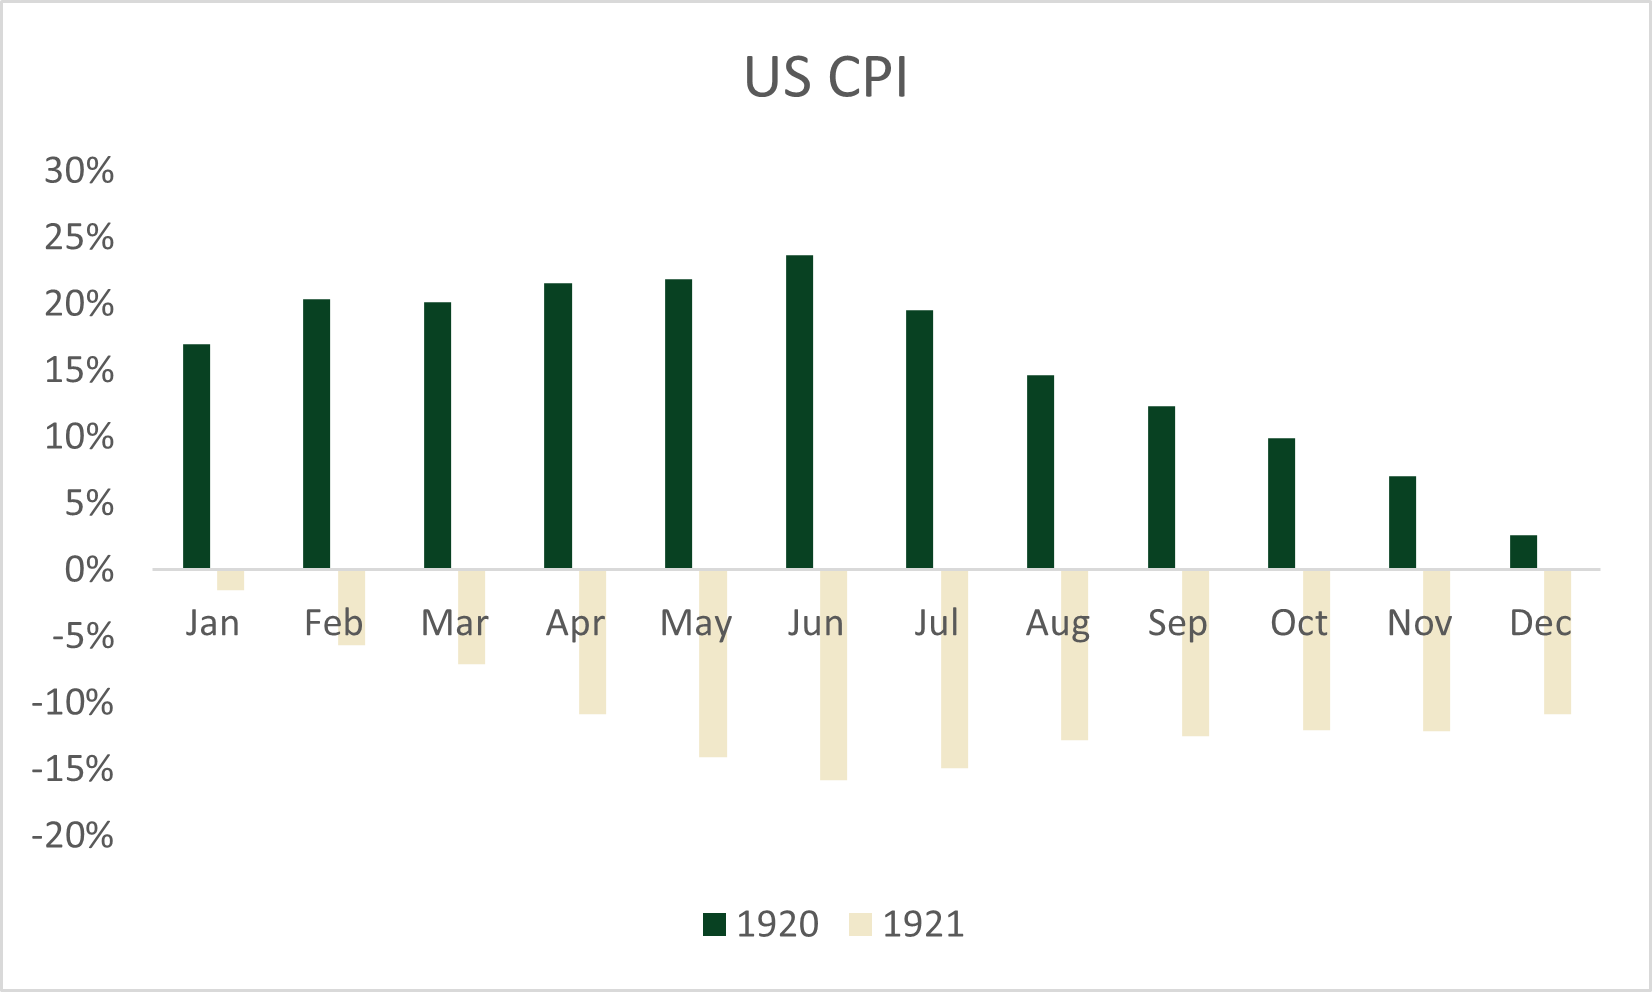 US Inflation as measured by CPI in 1920 and 1921Source: ELM Responsible Investments and <a href=